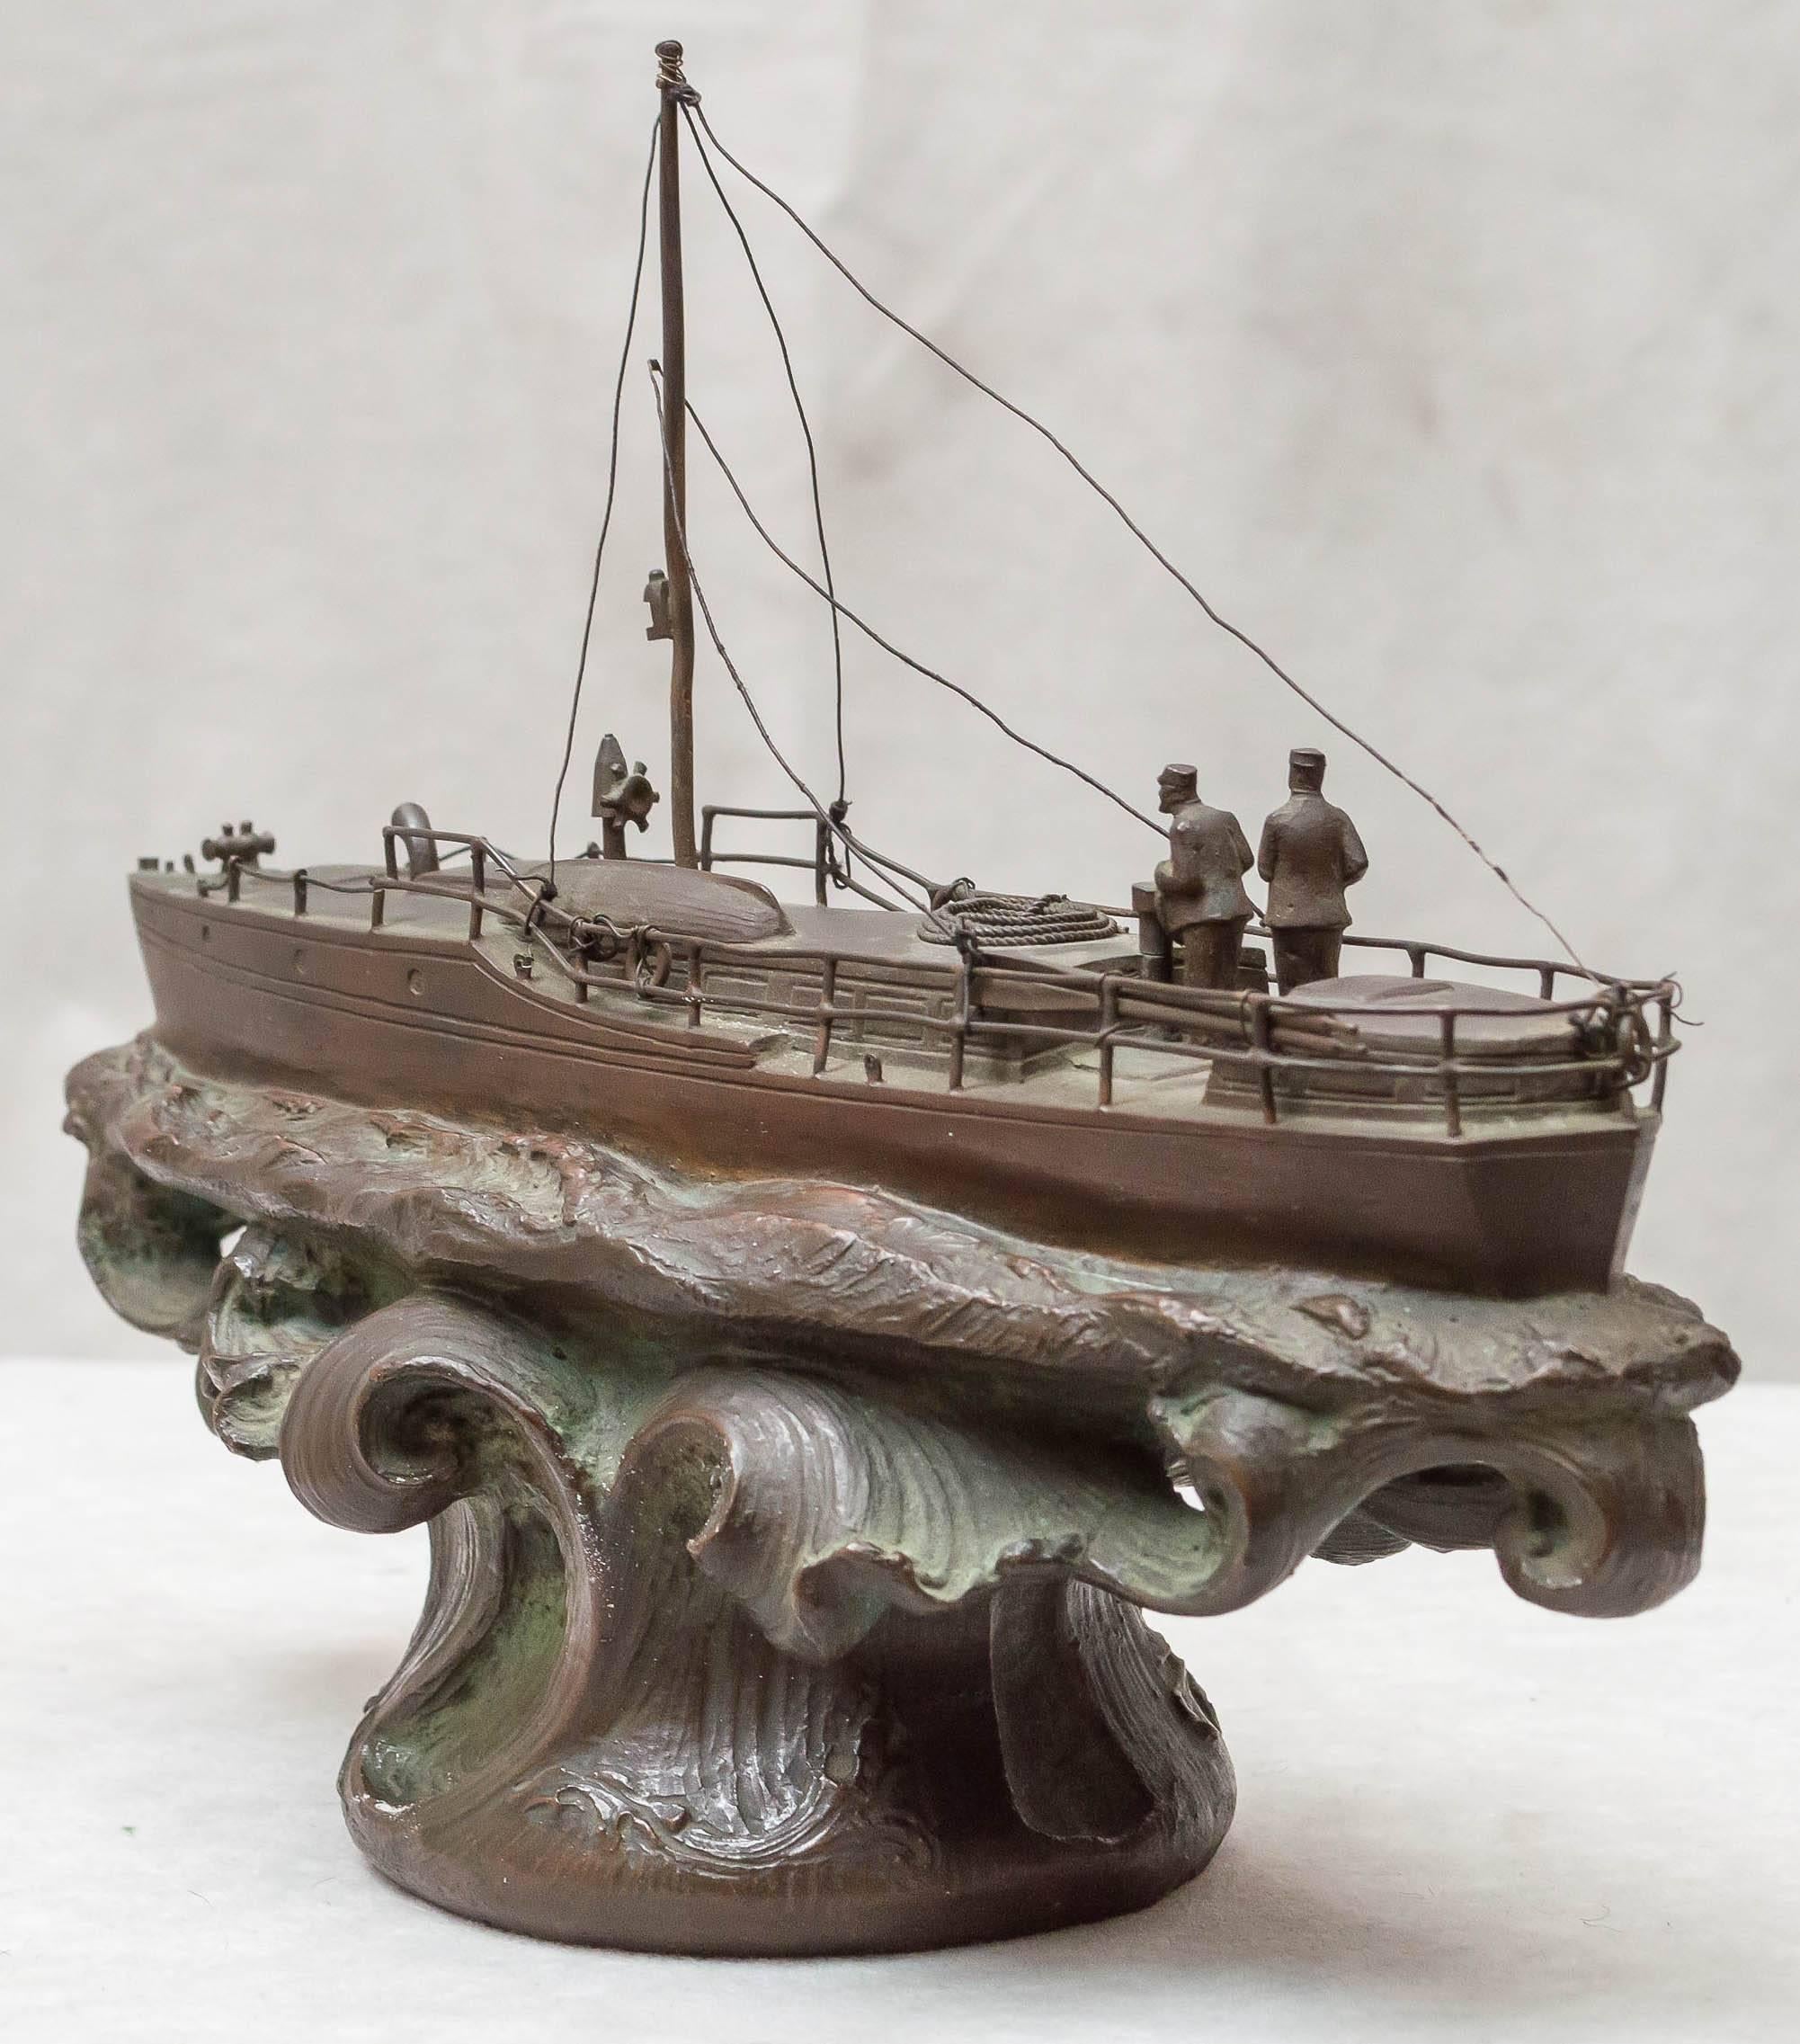 We are bronze dealers as many of you already know. We have here something very special. This is a model of the Ilys racing boat that won several races at the turn of the century. This 50 ft motor was owned by J.G.N. Whitaker of the Yactsman Club of